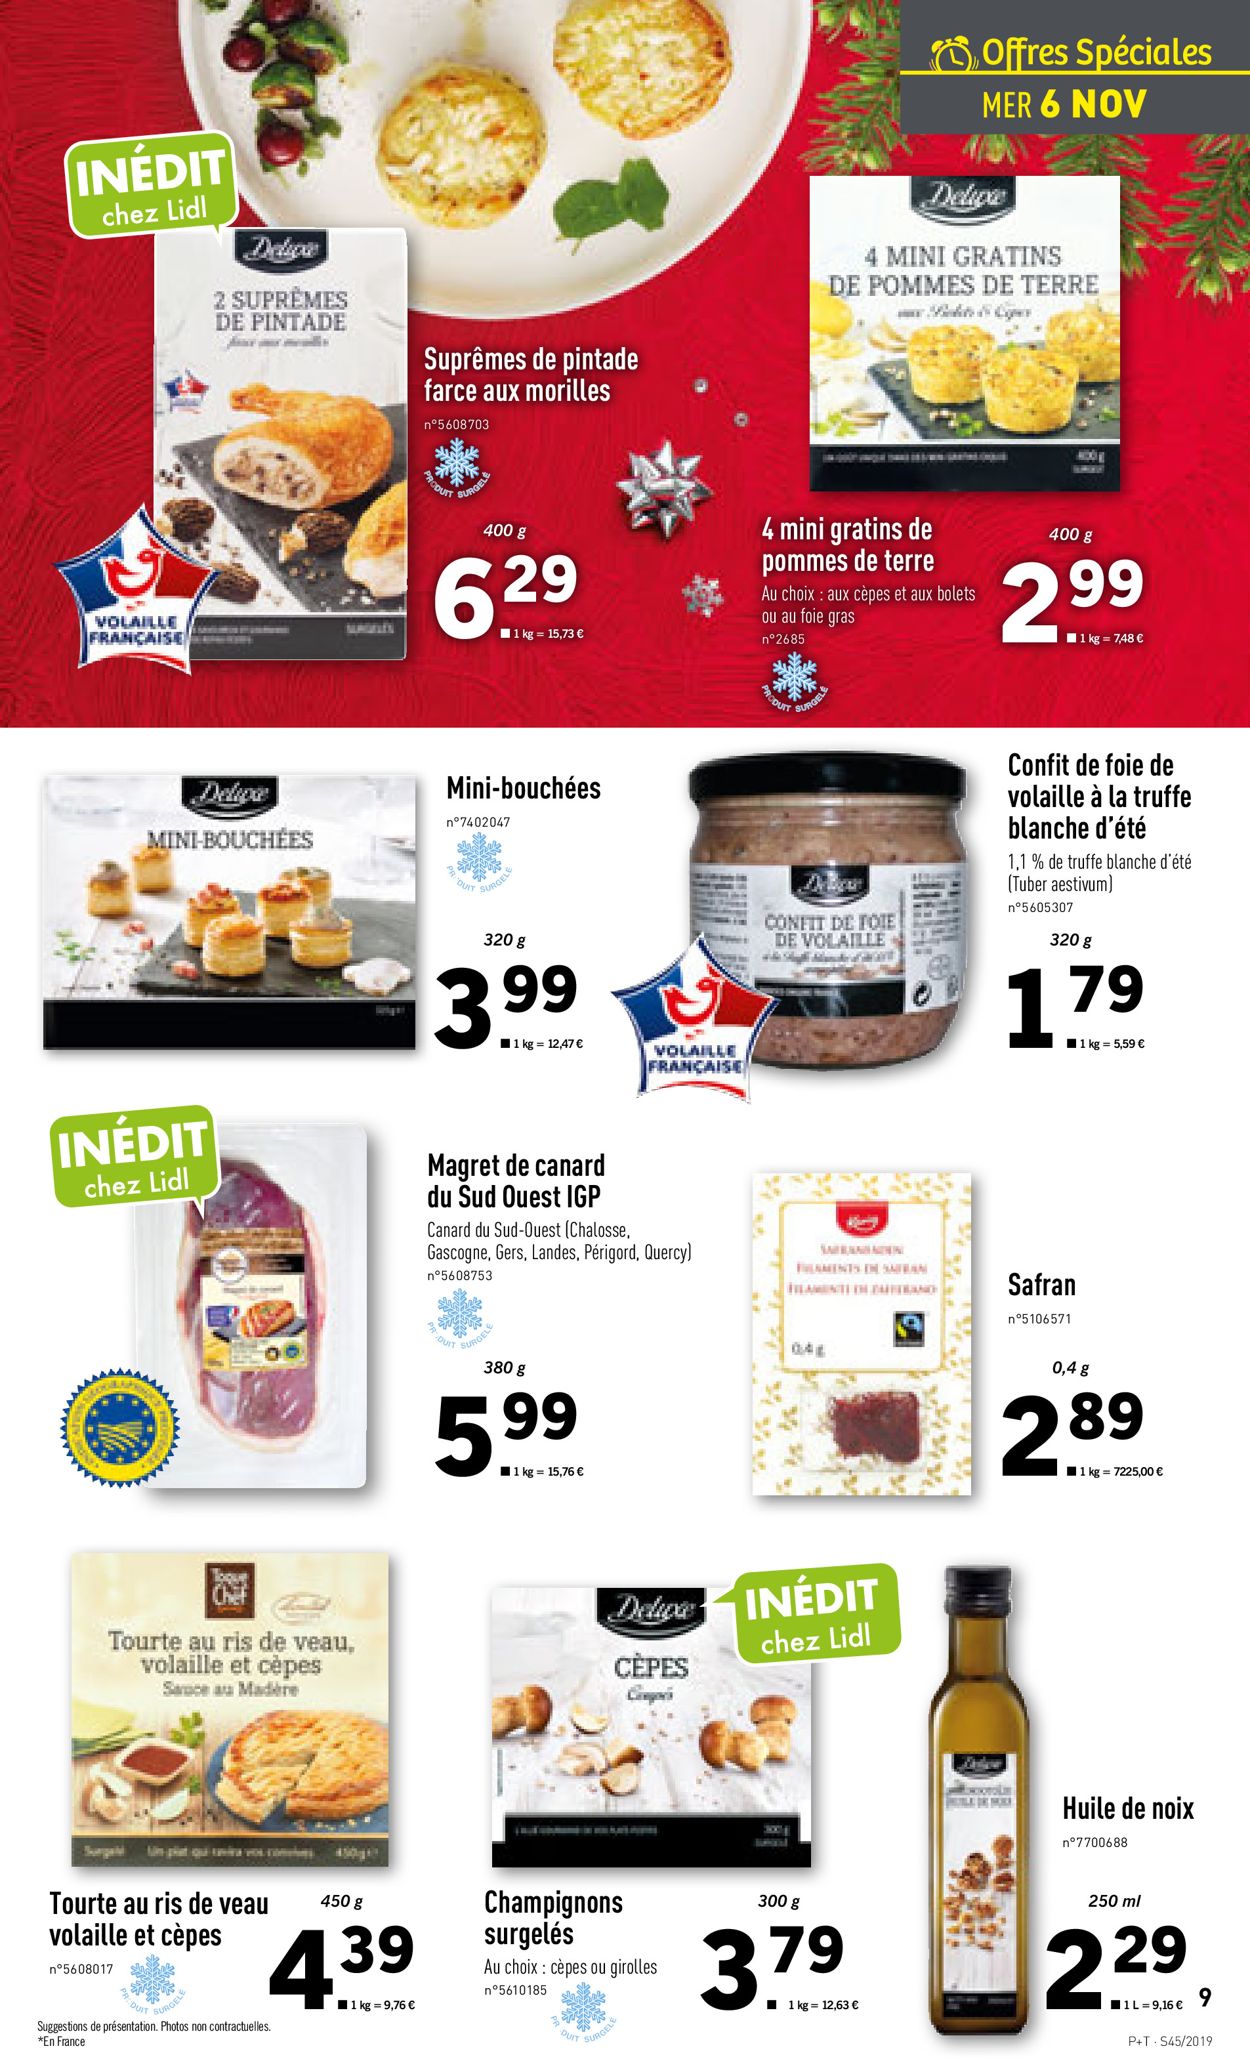 Lidl Catalogue - 06.11-12.11.2019 (Page 9)